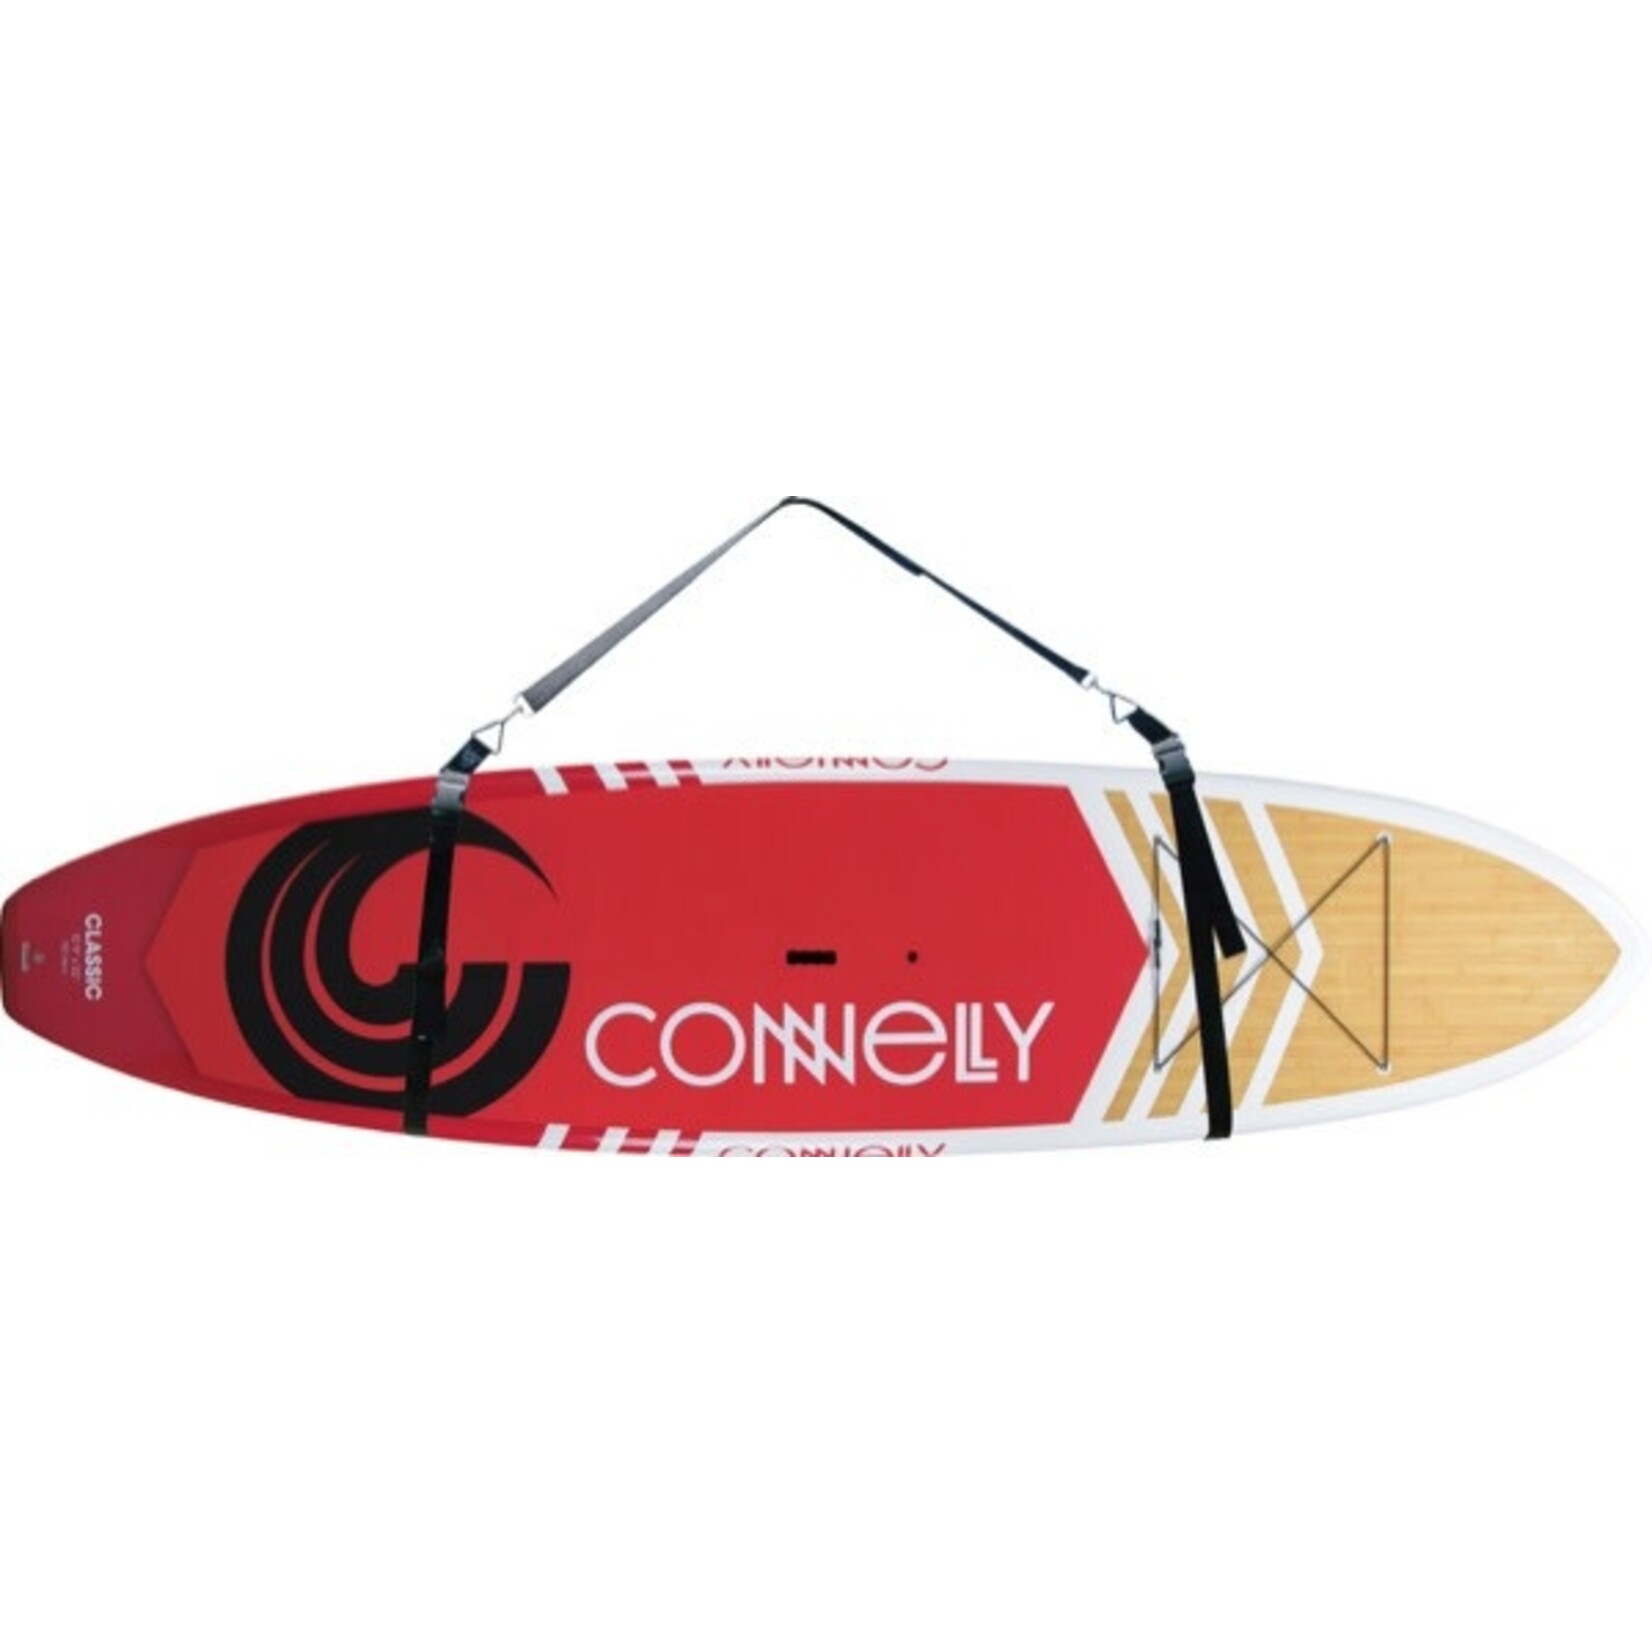 Connelly SUP Strap Carry System